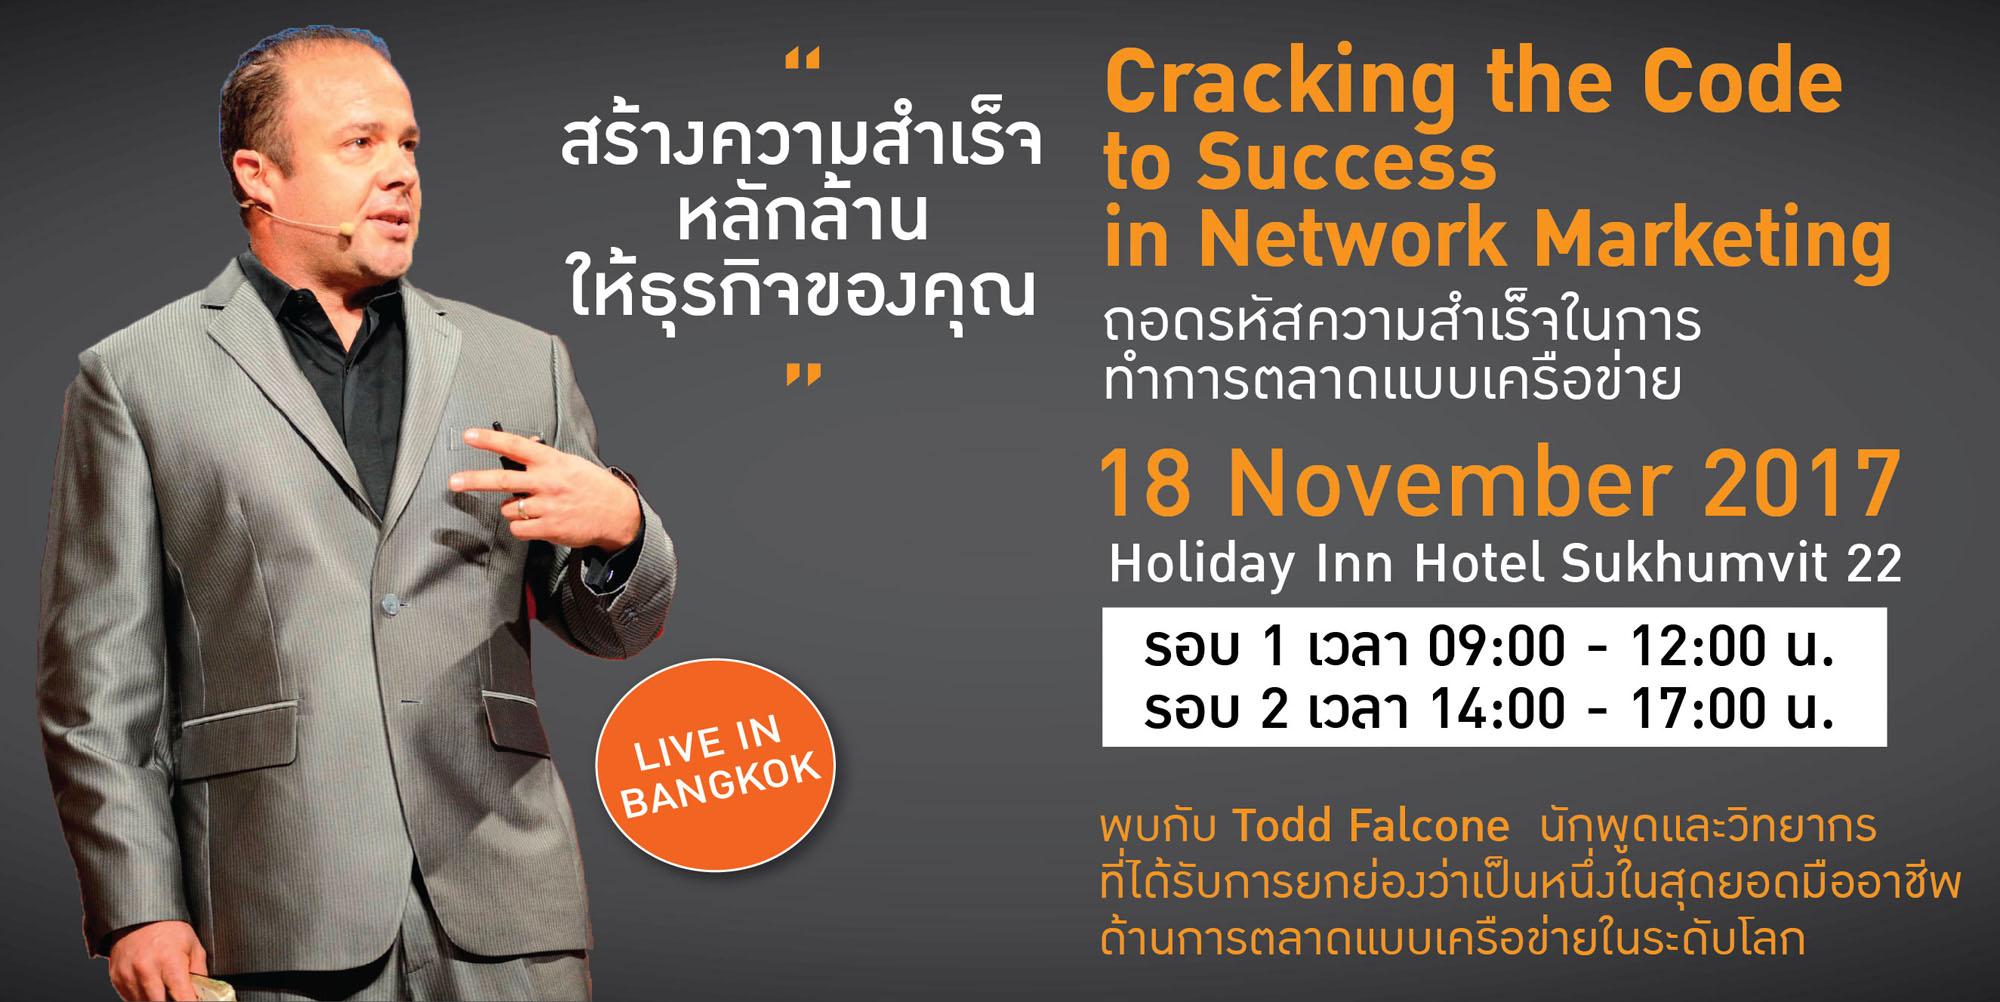 Cracking the Code to Success in Network Marketing (FREE SEMINAR)